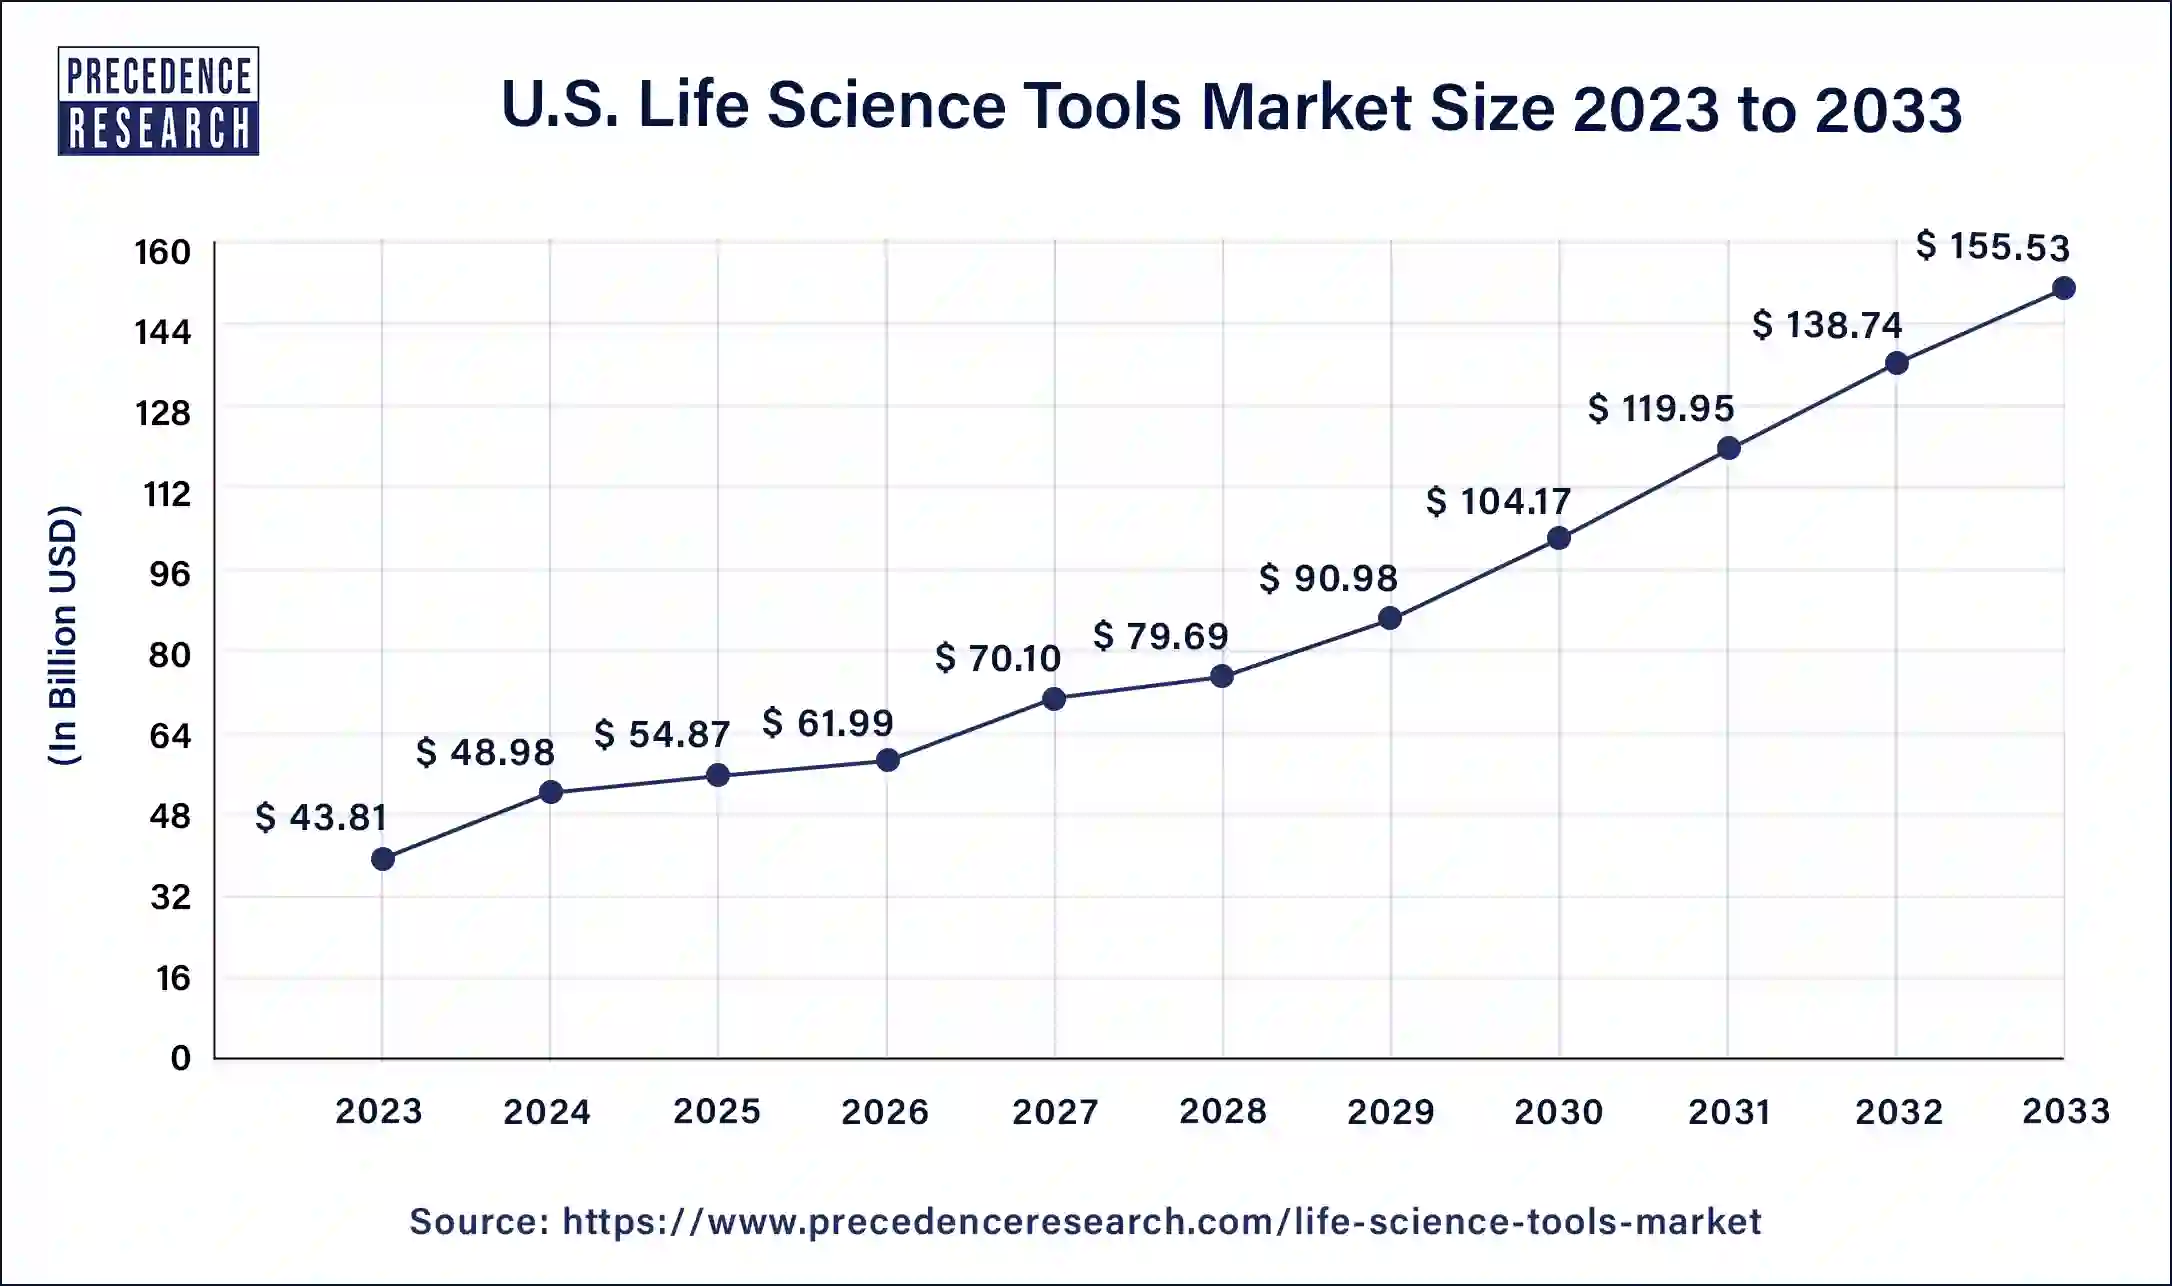 U.S. Life Science Tools Market Size 2024 to 2033